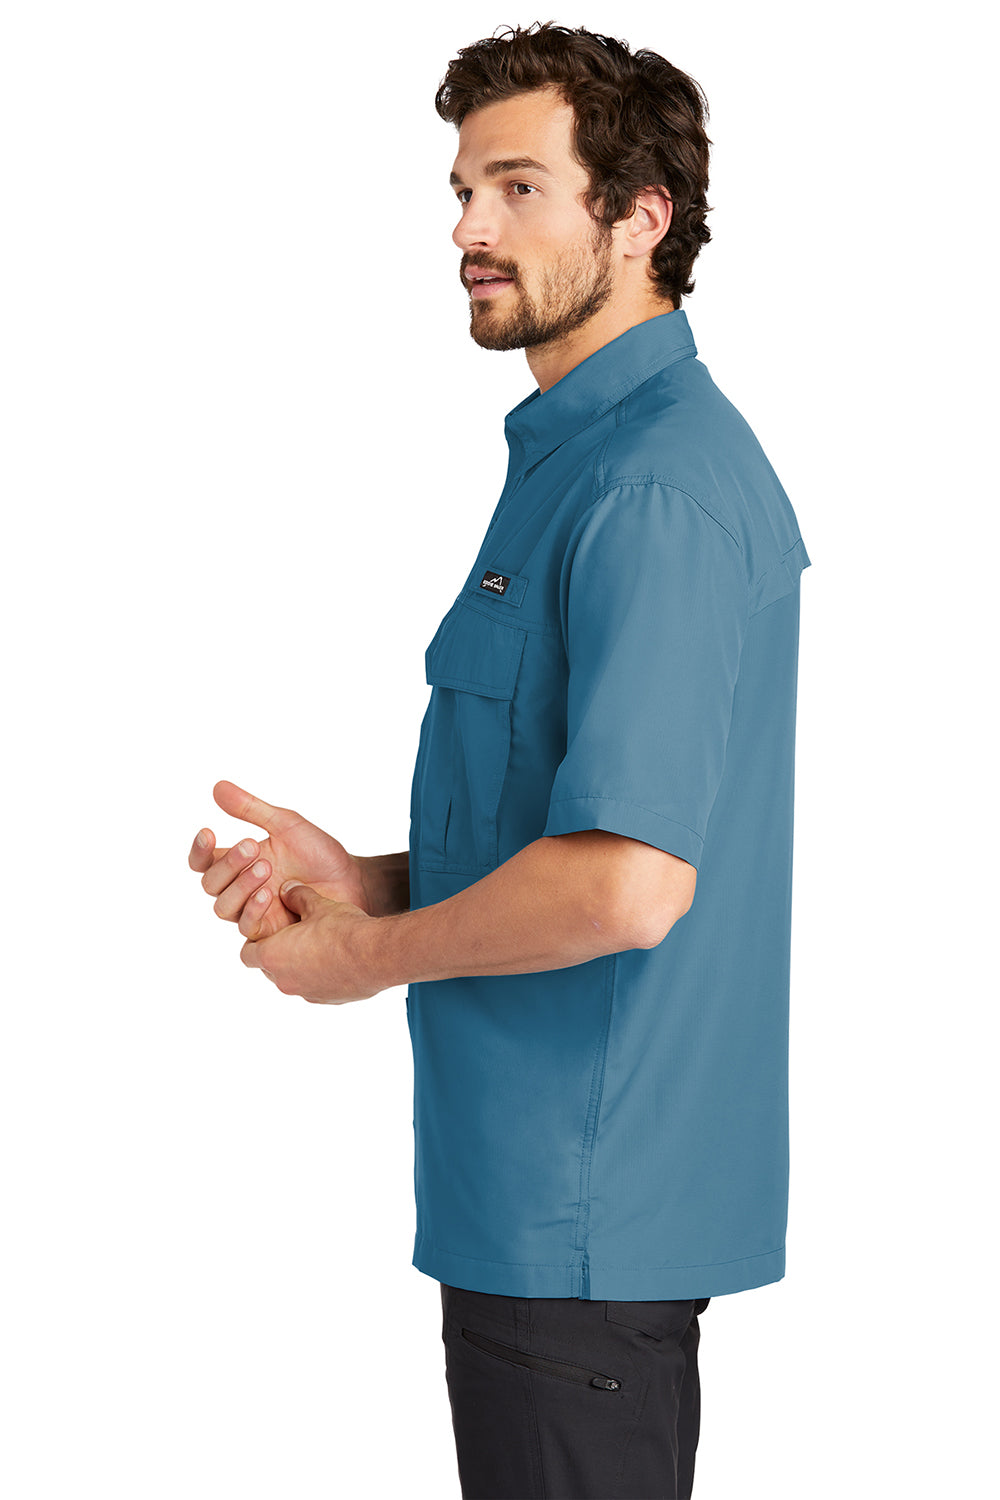 Eddie Bauer EB602 Mens Performance Fishing Moisture Wicking Short Sleeve Button Down Shirt w/ Double Pockets Gulf Teal Blue Model Side